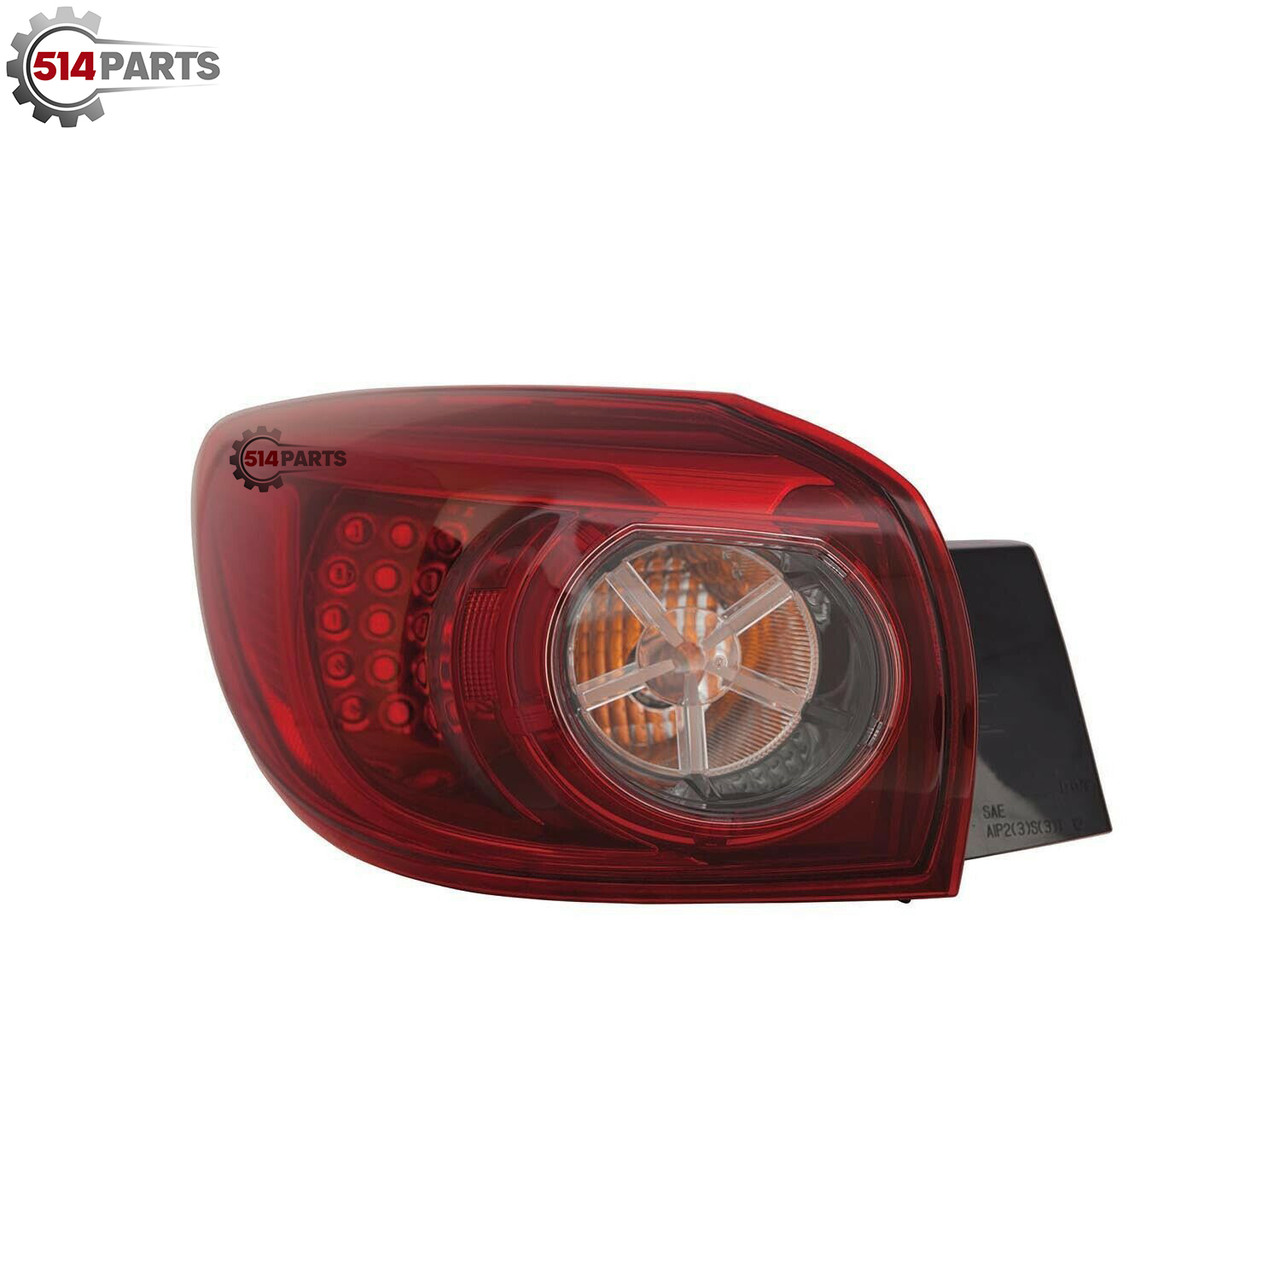 2014 - 2018 MAZDA 3 and MAZDA 3 SPORT(CANADA) Hatchback JAPAN BUILT LED TAIL LIGHTS High Quality - PHARES ARRIERE a DEL Haute Qualite